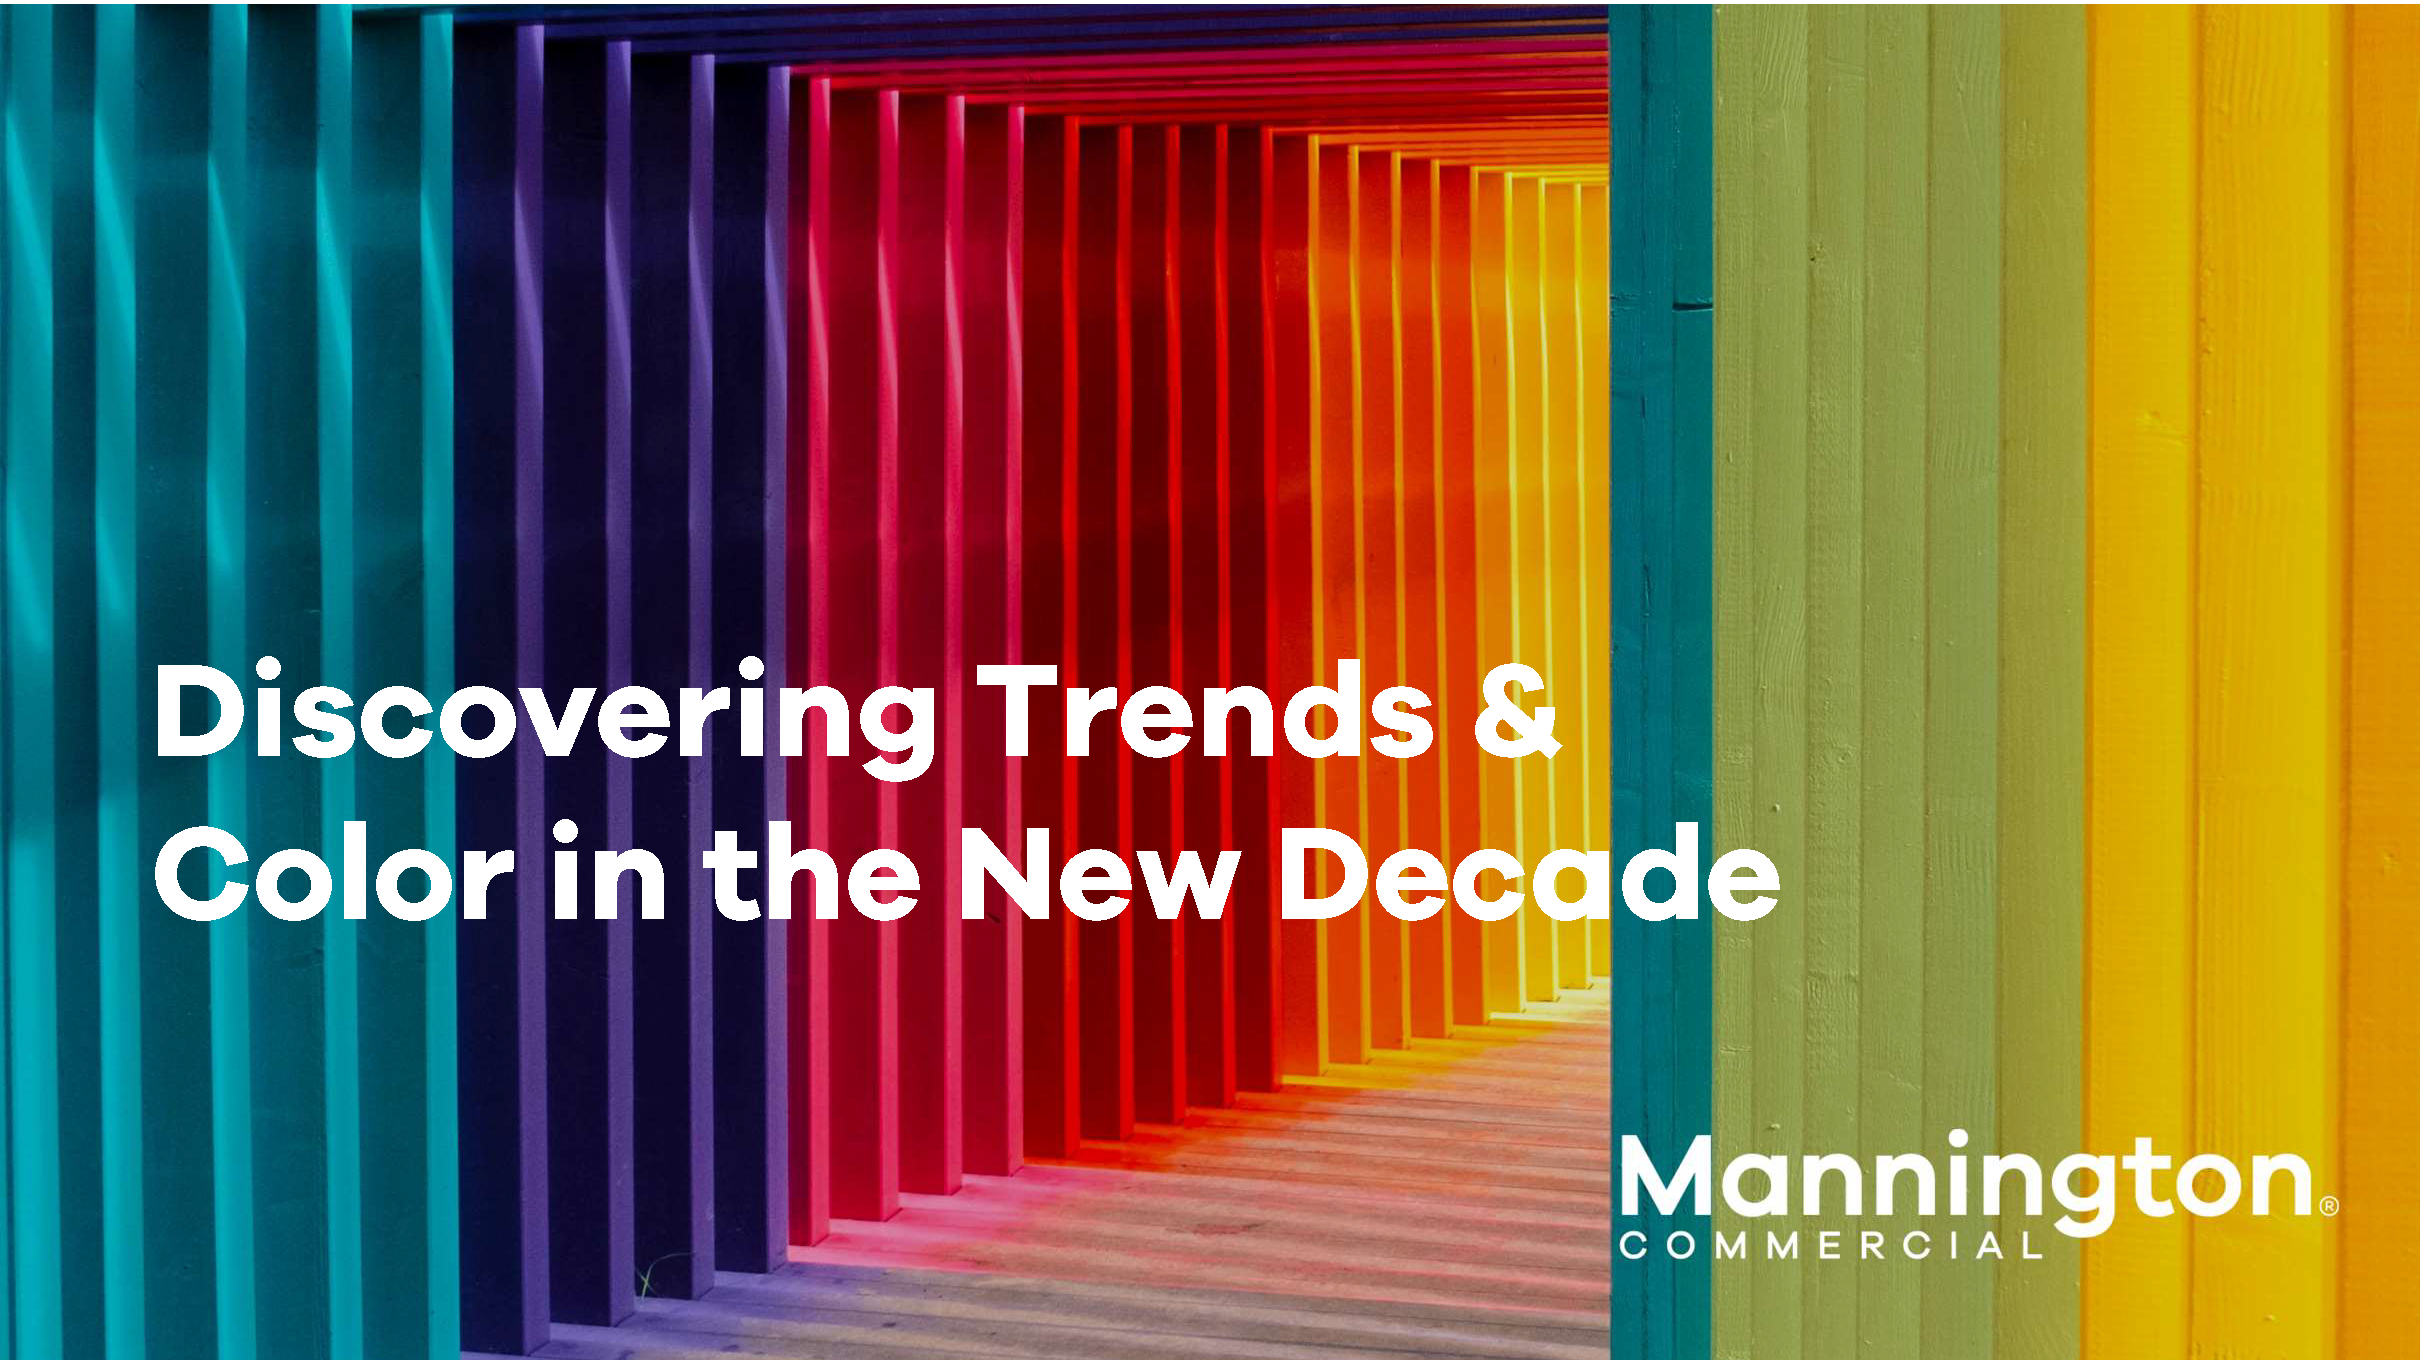 Discovering Trends & Color in the New Decade Cover